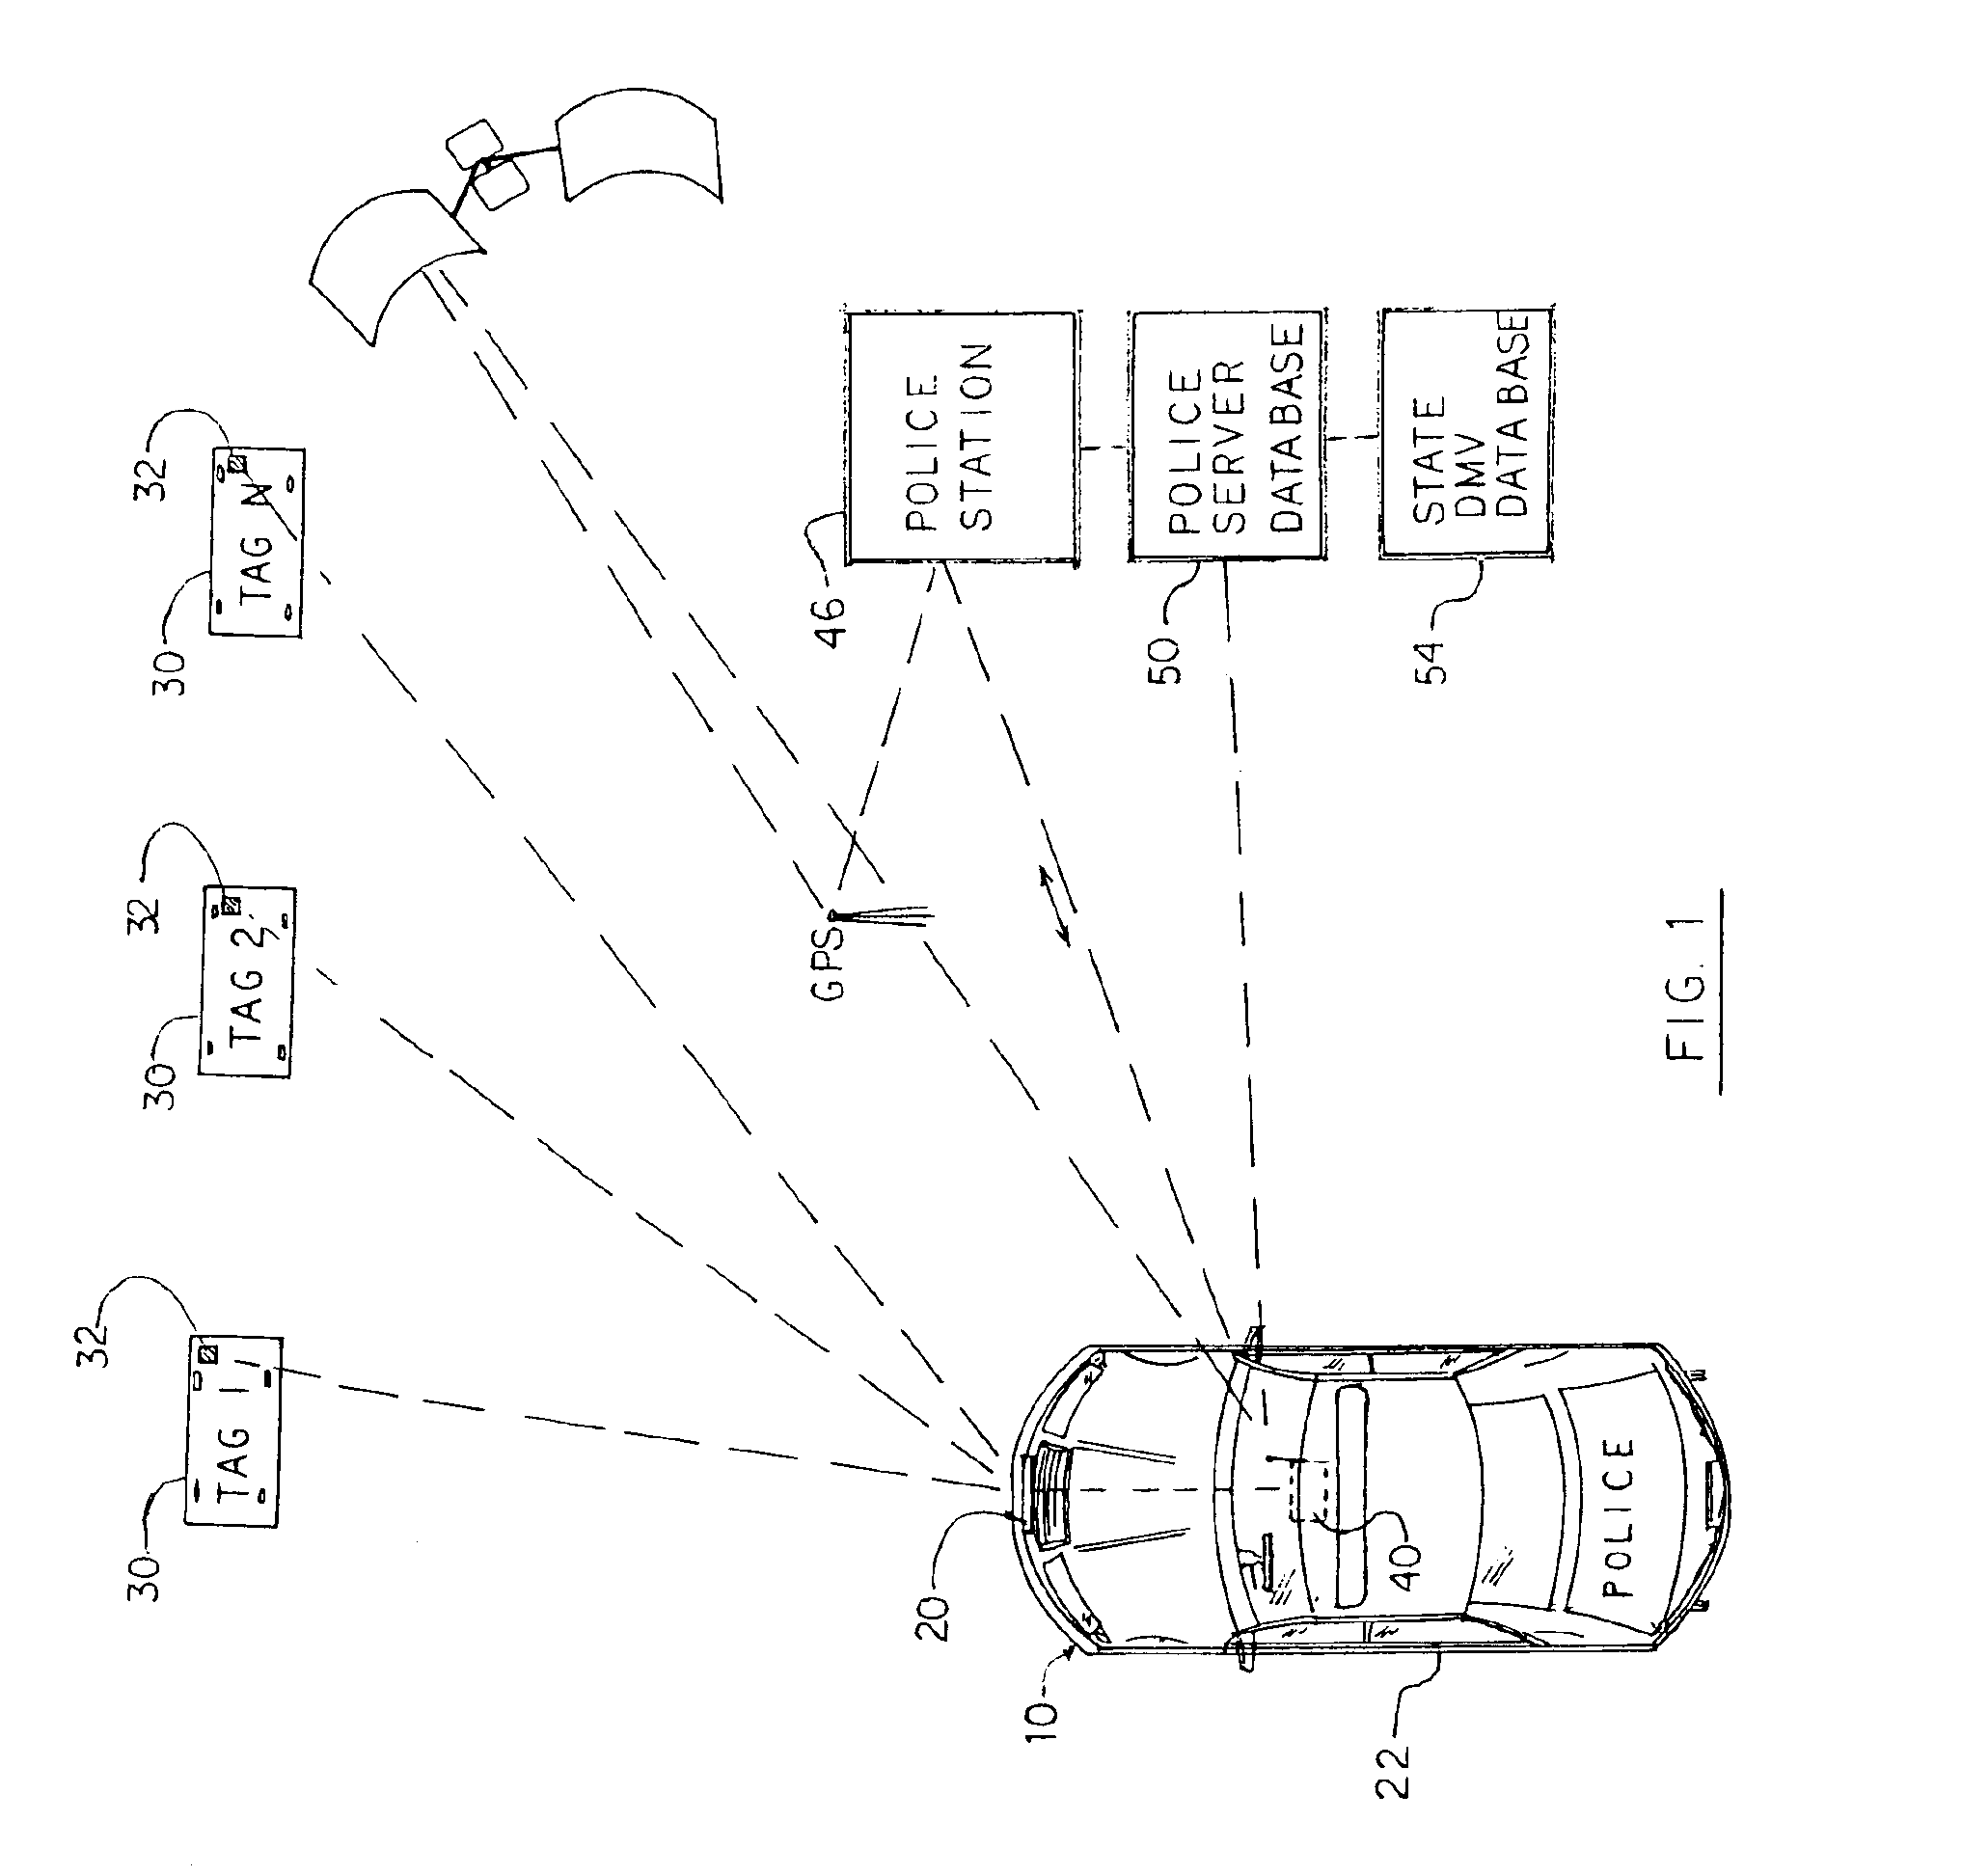 Automobile license tag scanning system